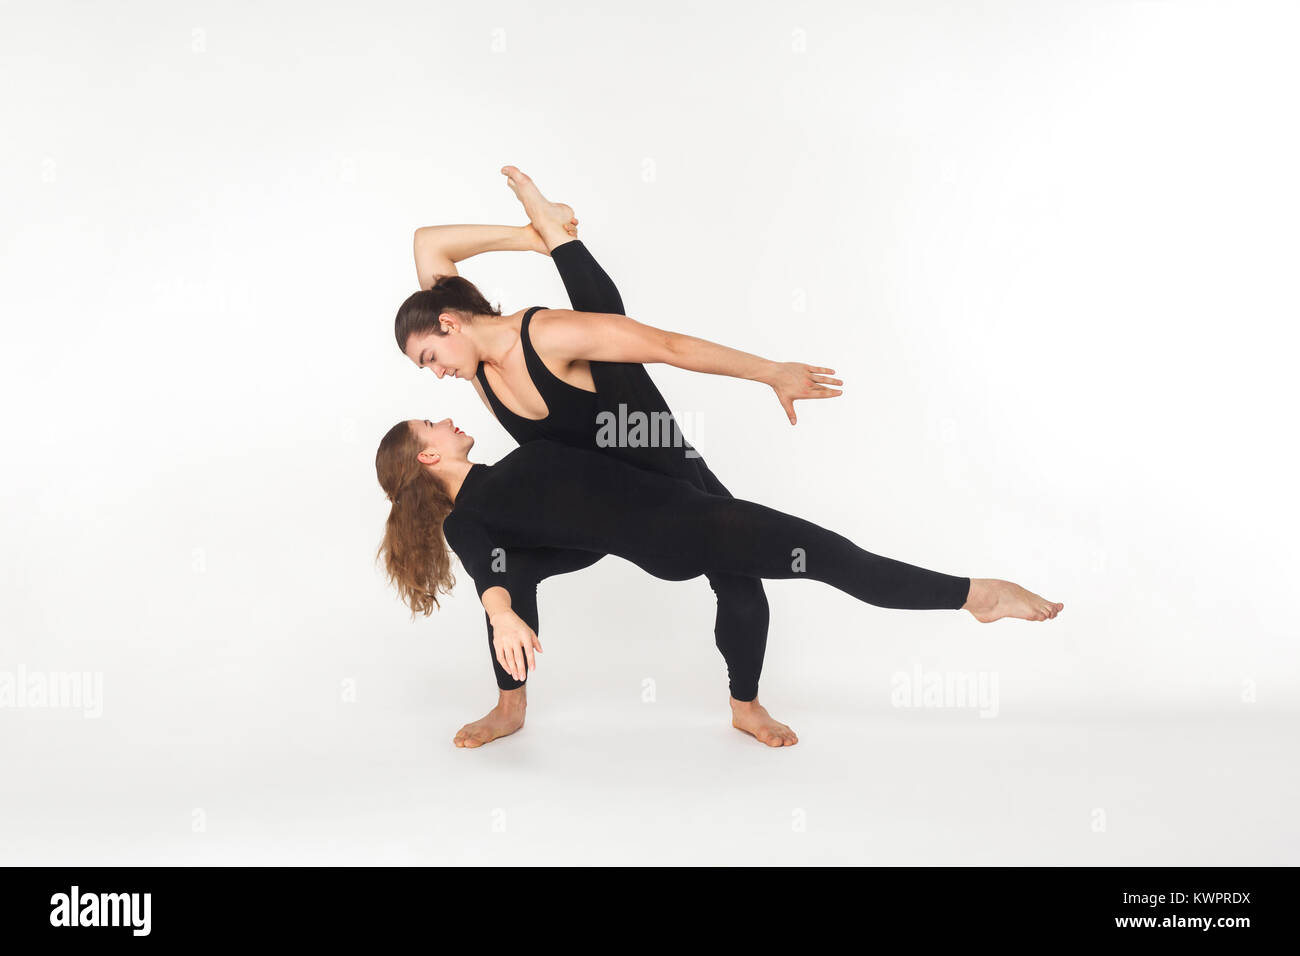 Two flexibility friends dancing, doing performance. Studio shot, isolated on white background Stock Photo